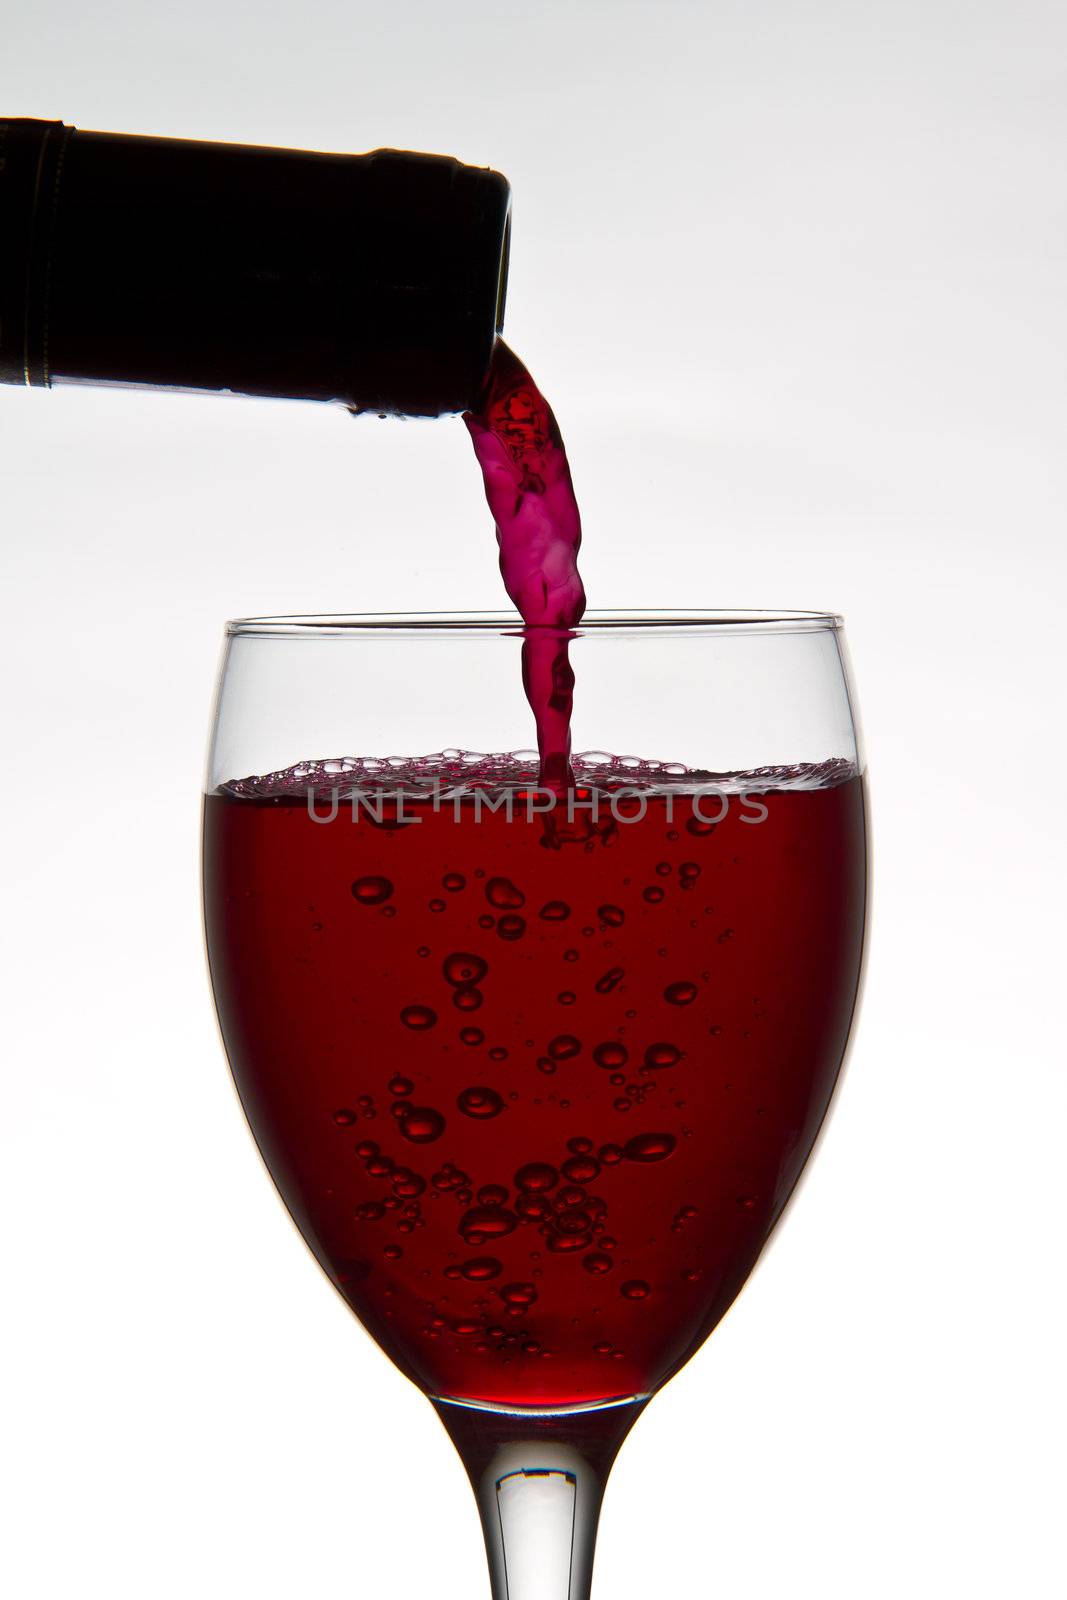 red wine pouring down from a wine bottle into a wine glass on white background